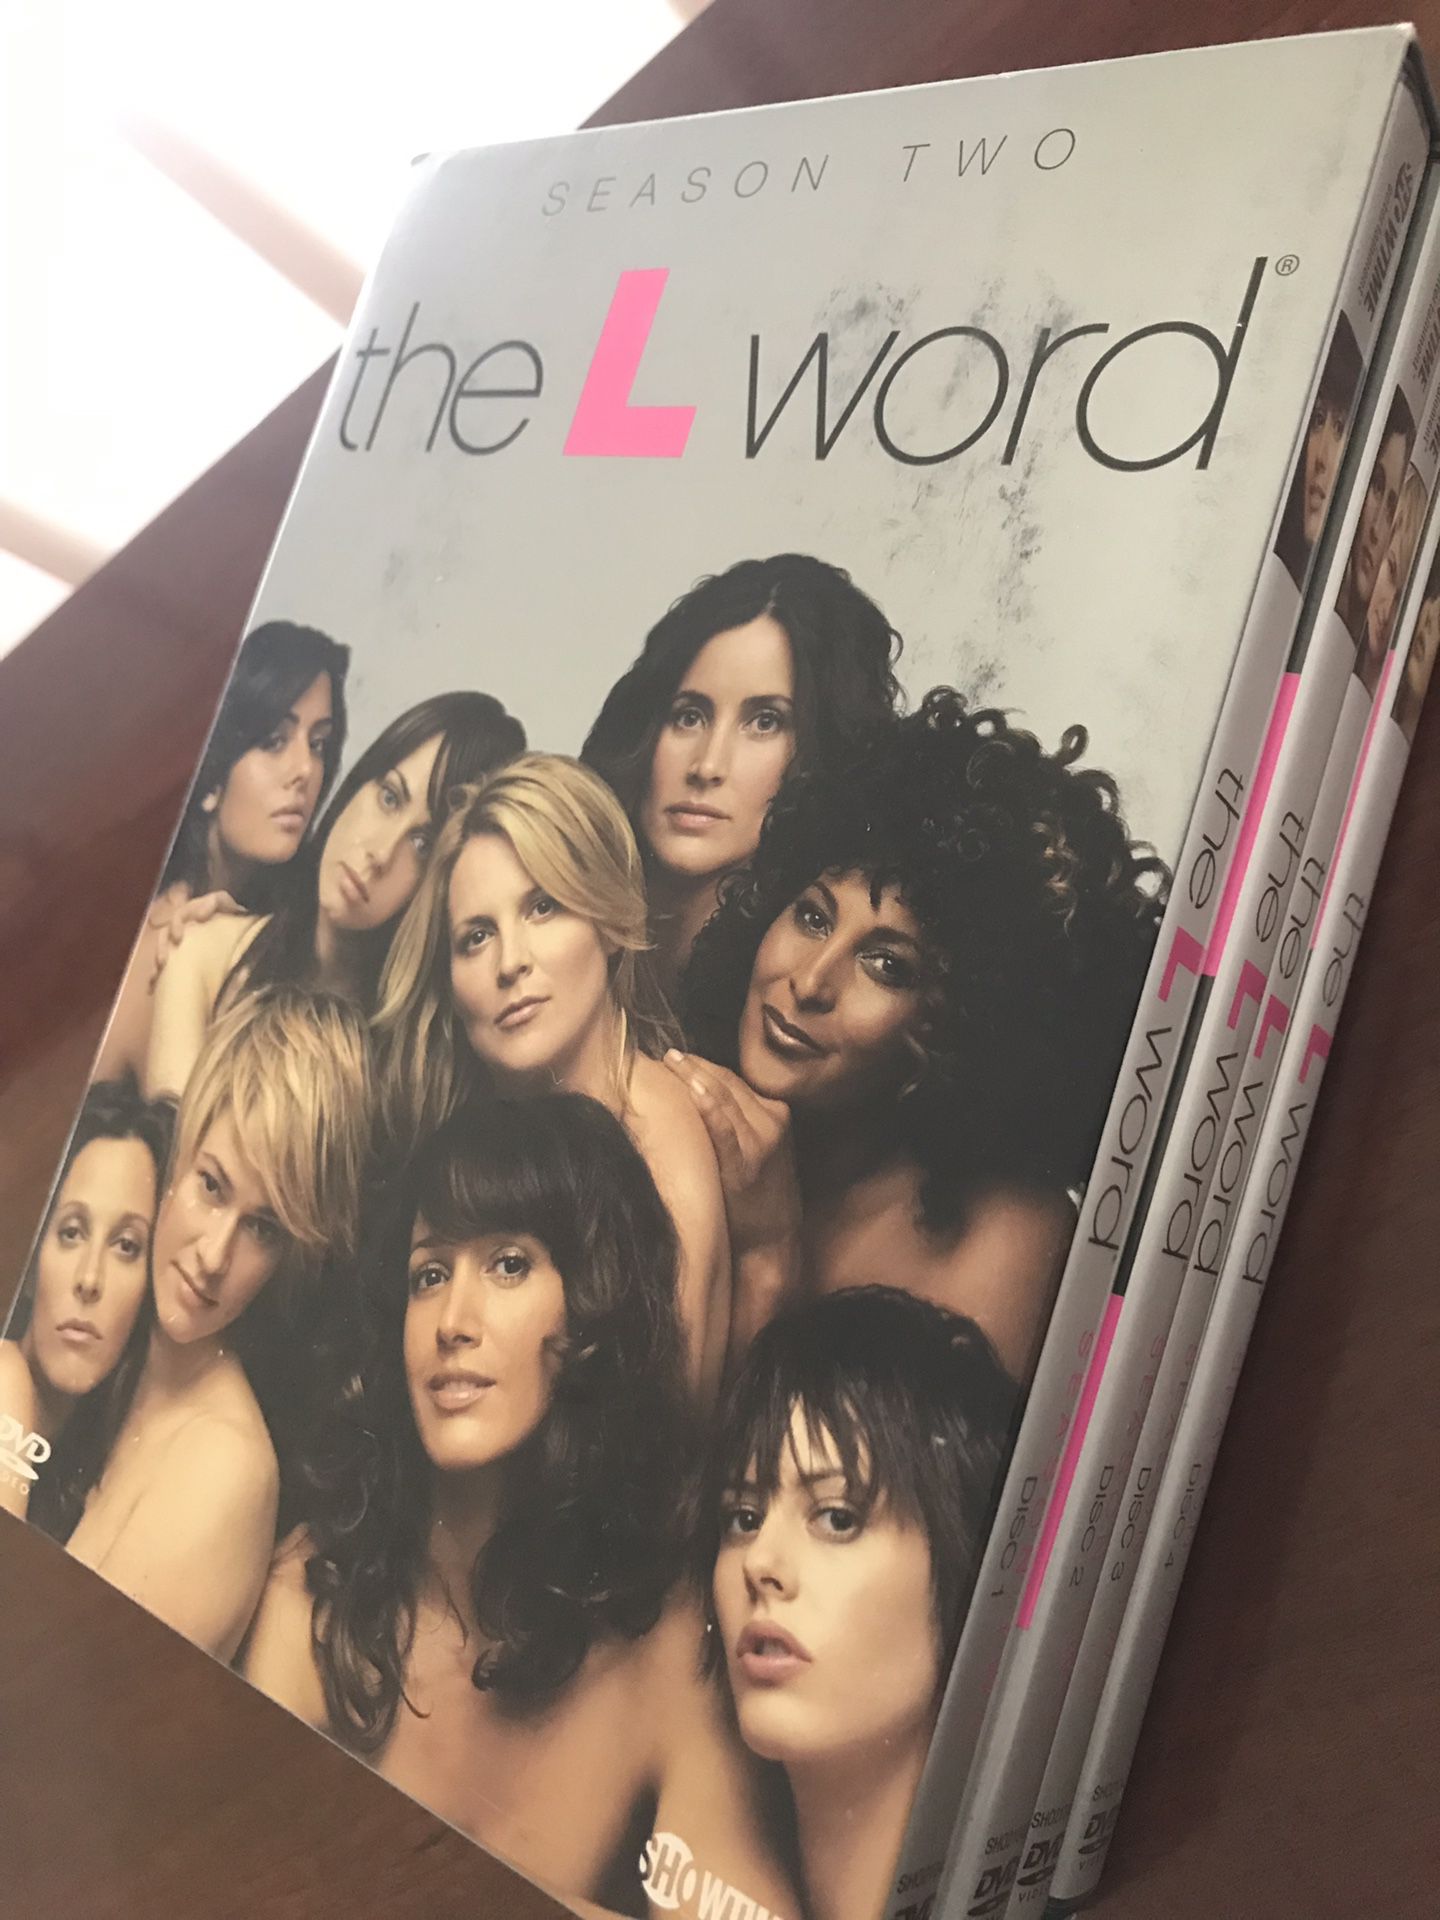 Season Two of The L Word